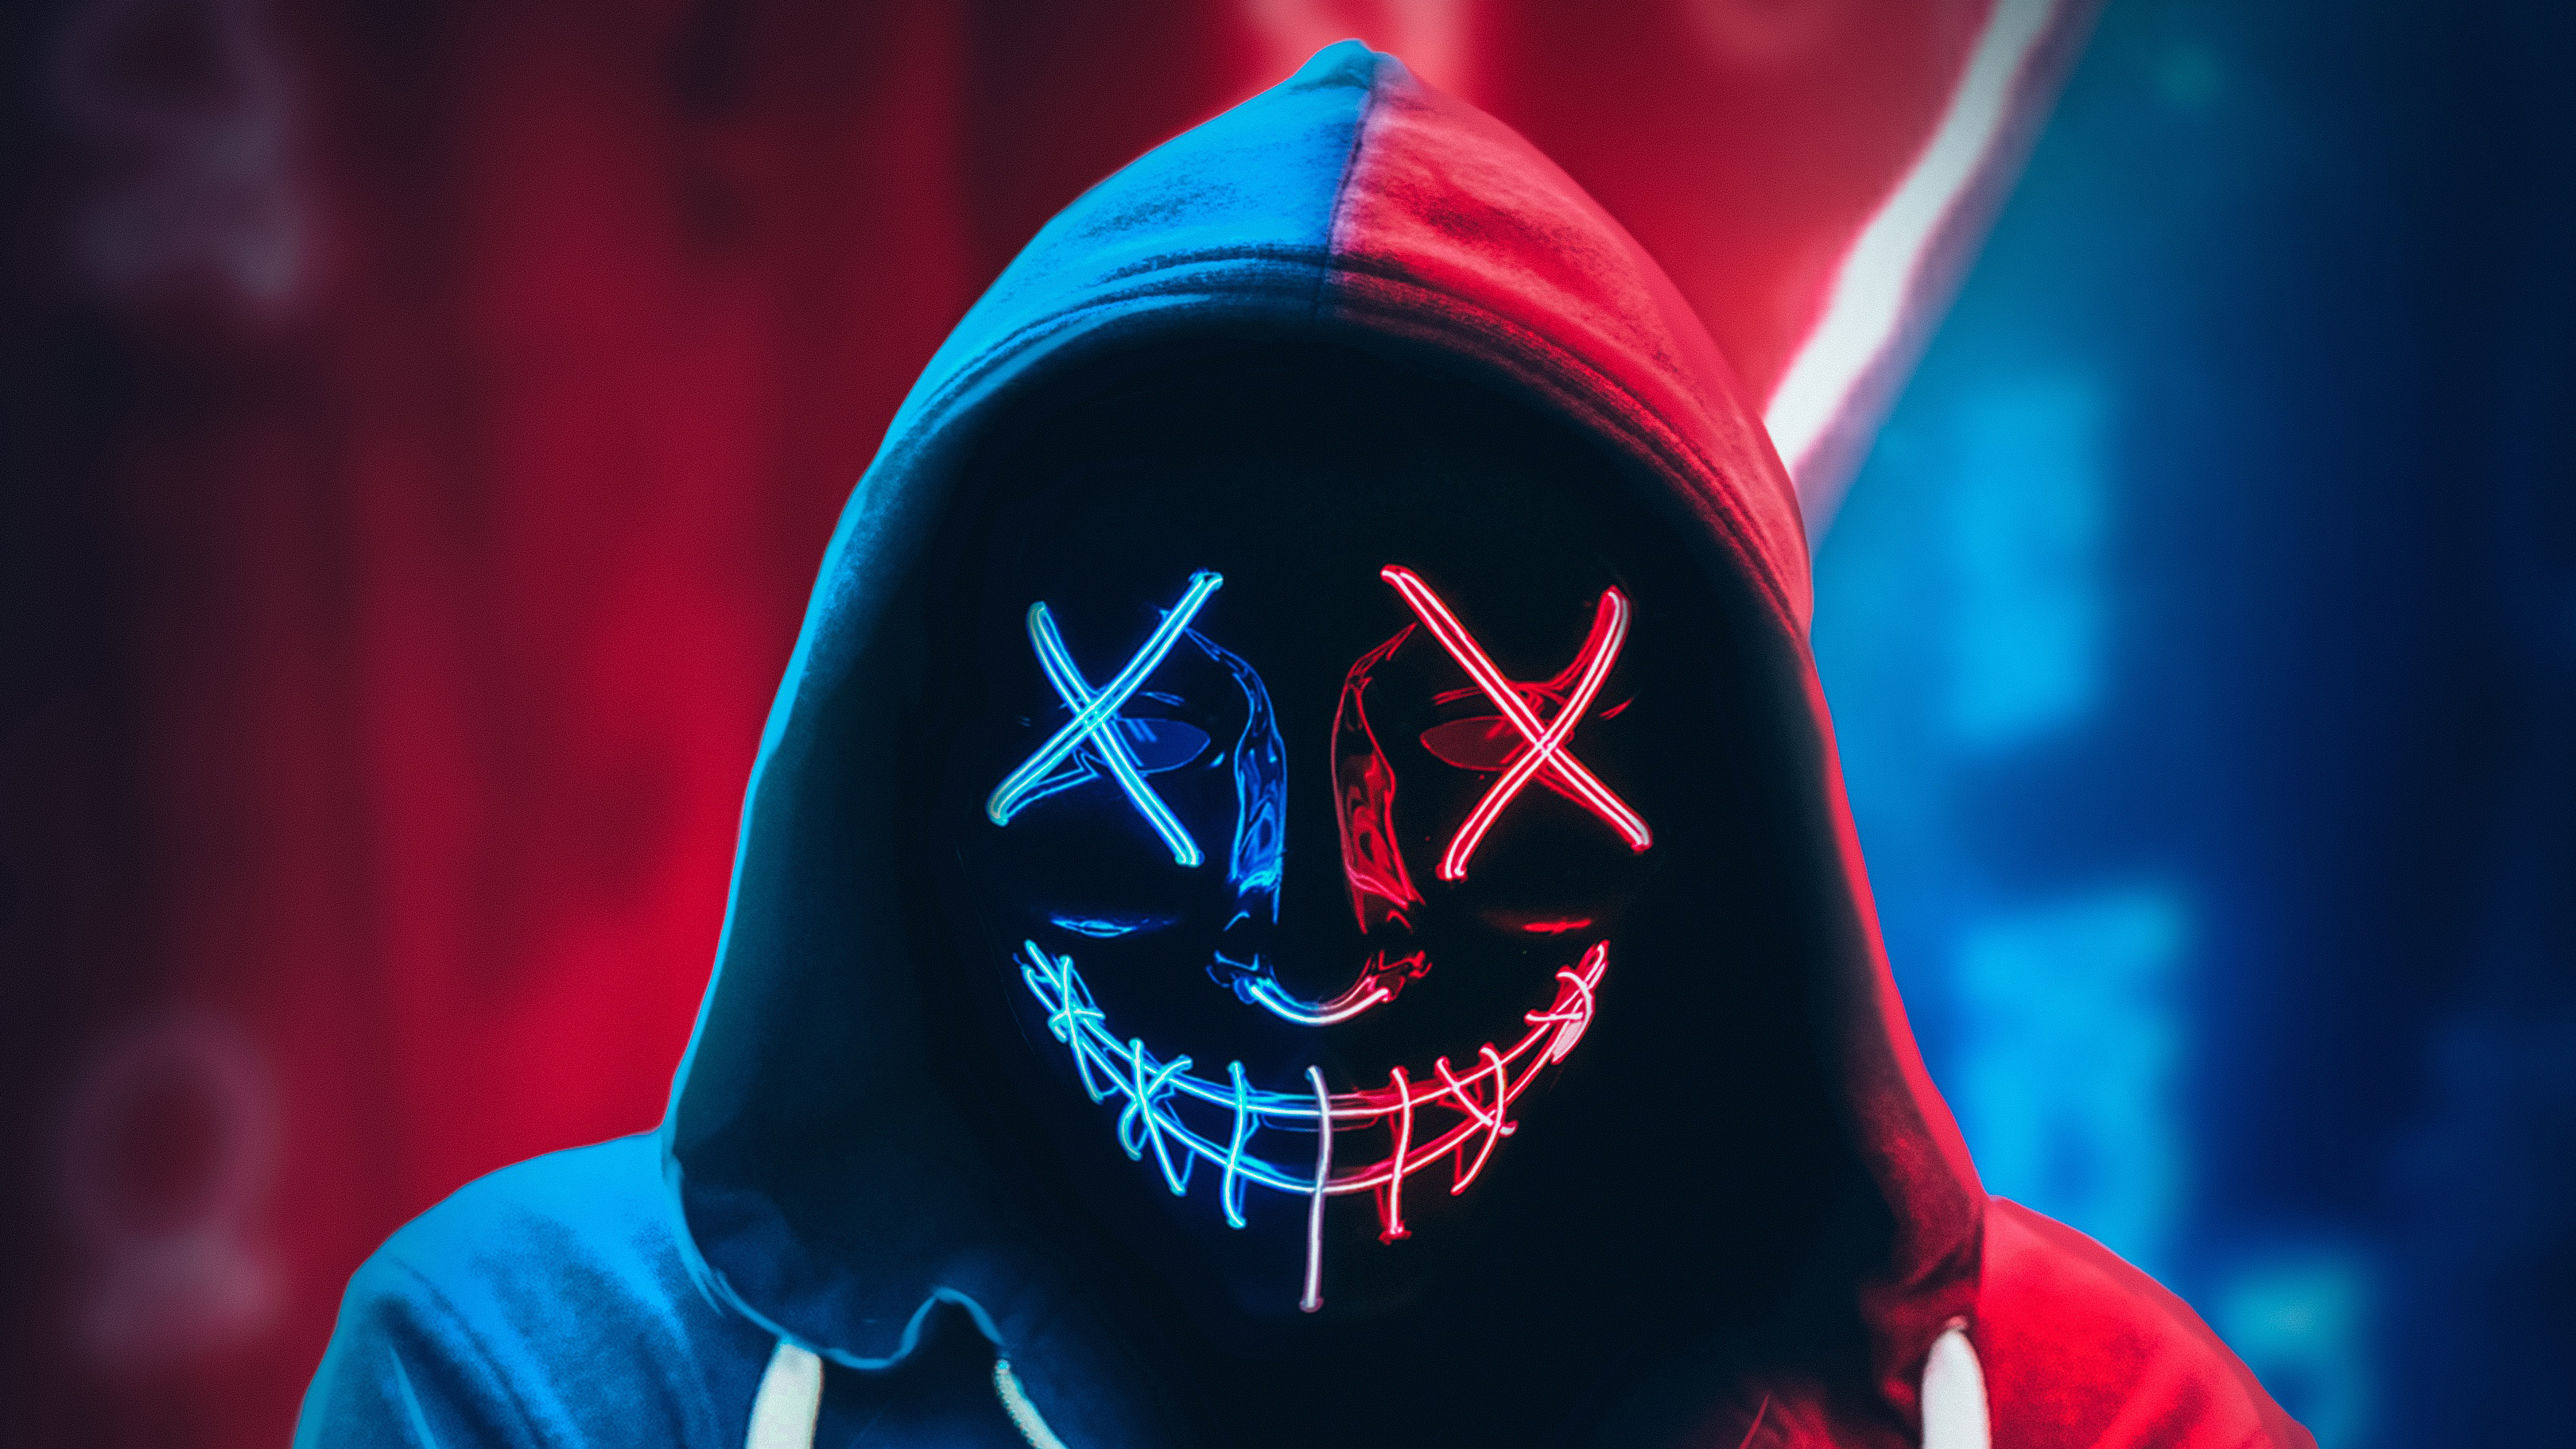 Neon Mask Hoodie 4k, HD Photography, 4k Wallpapers, Images ...